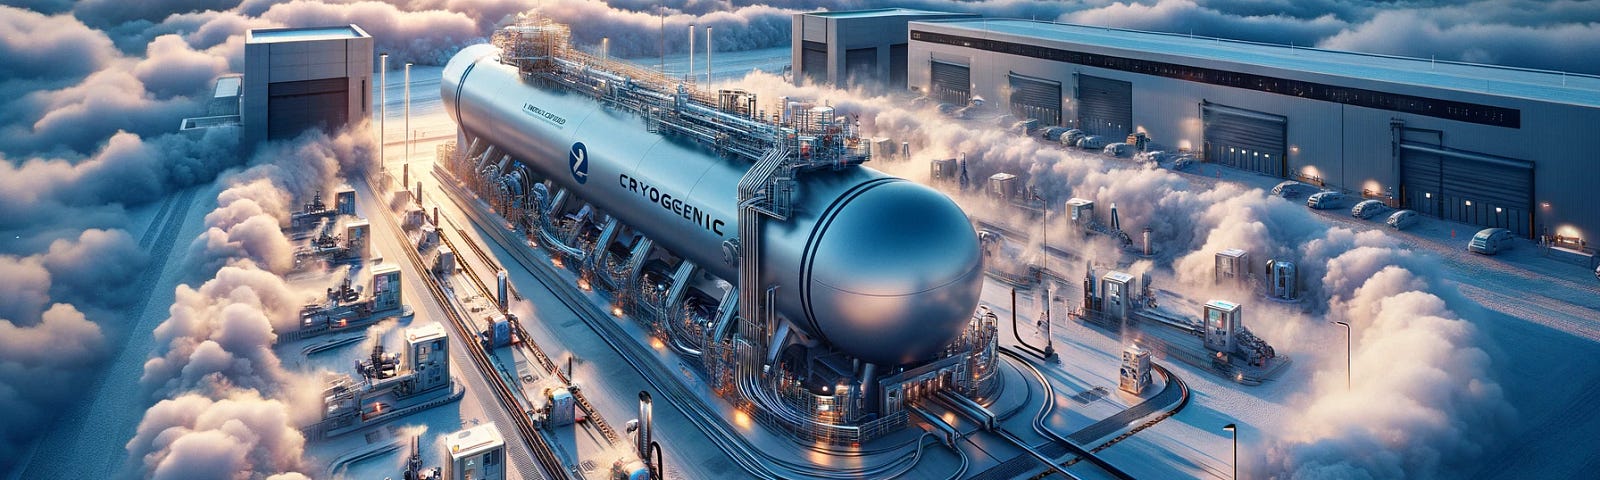 ChatGPT & DALL-E generated panoramic image of a cryogenic hydrogen tanker surrounded by icy vapor at a refueling station